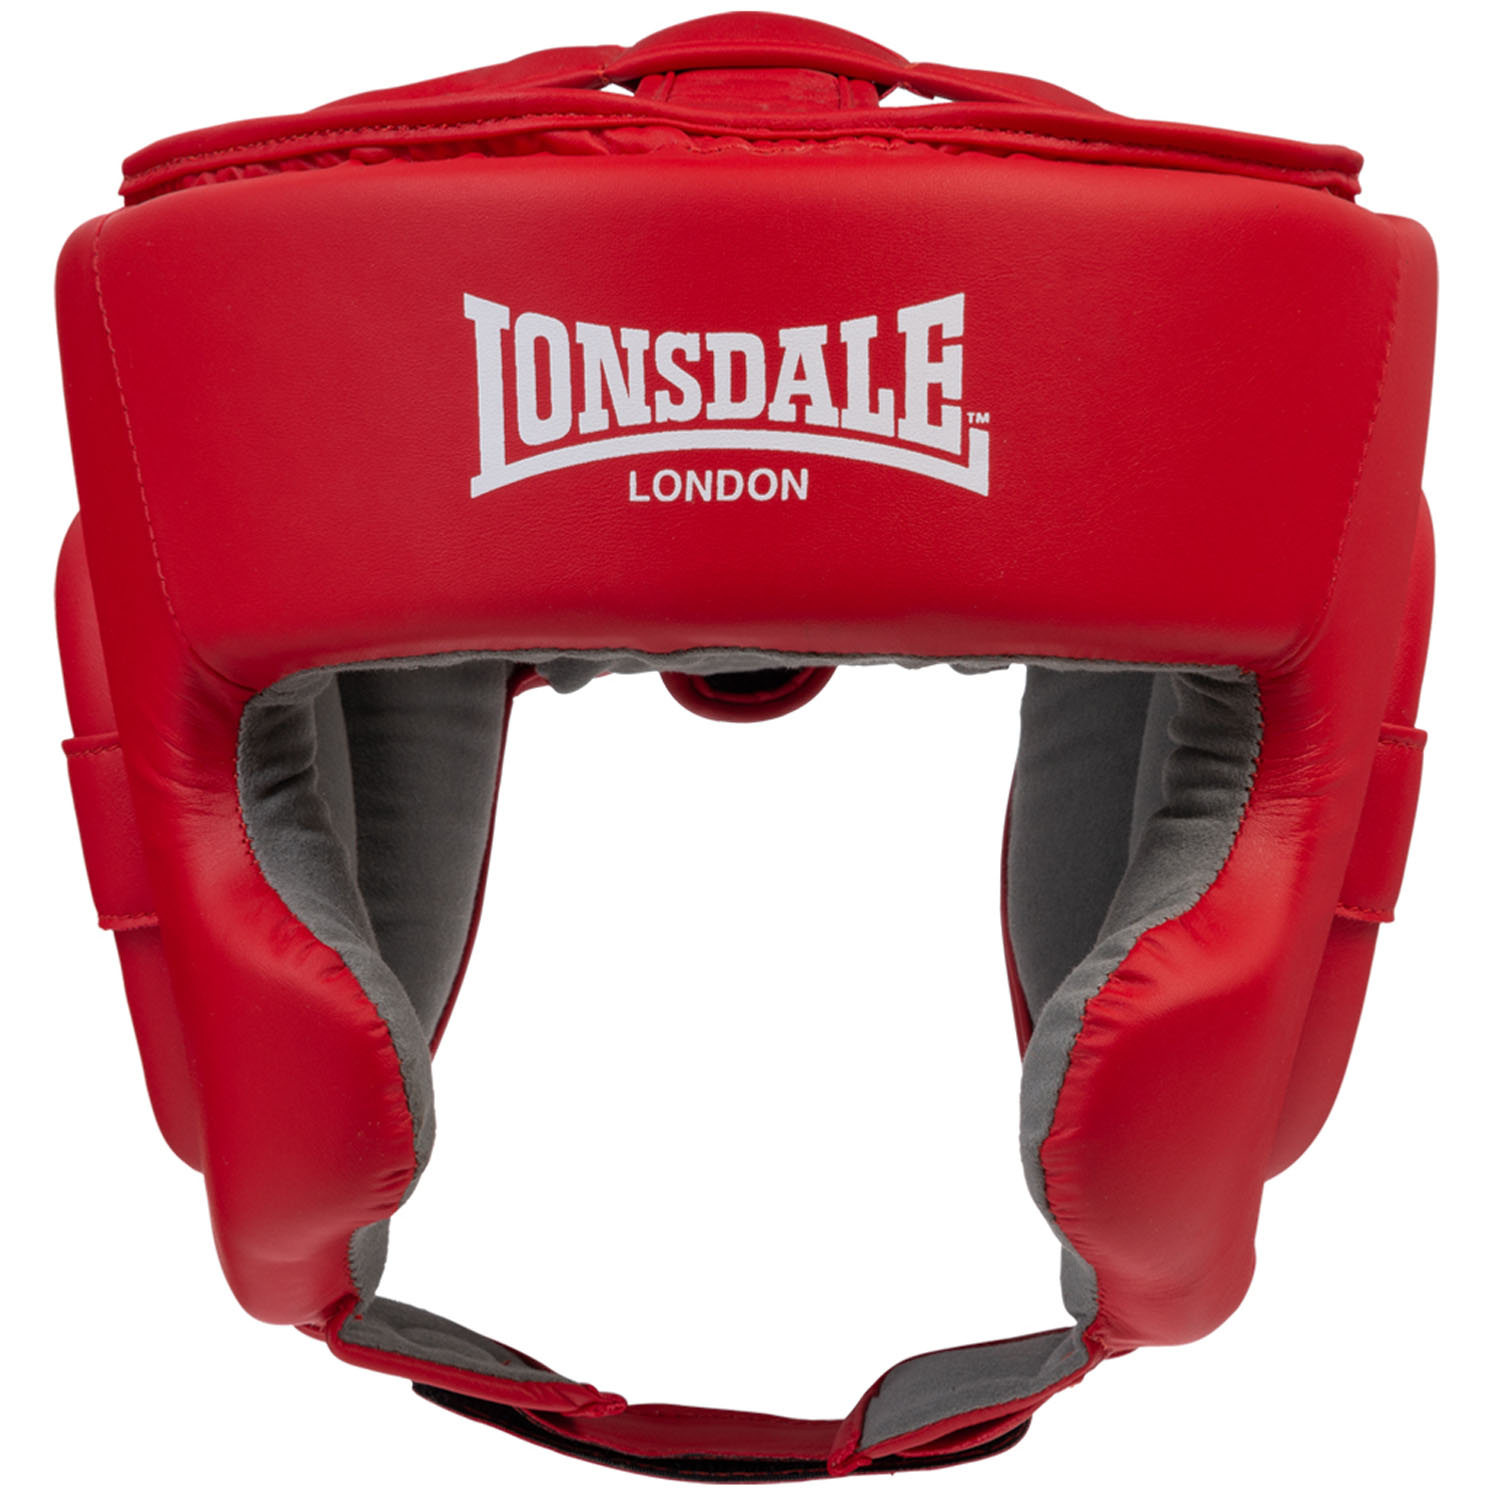 Lonsdale Head Guard, Stanford, red